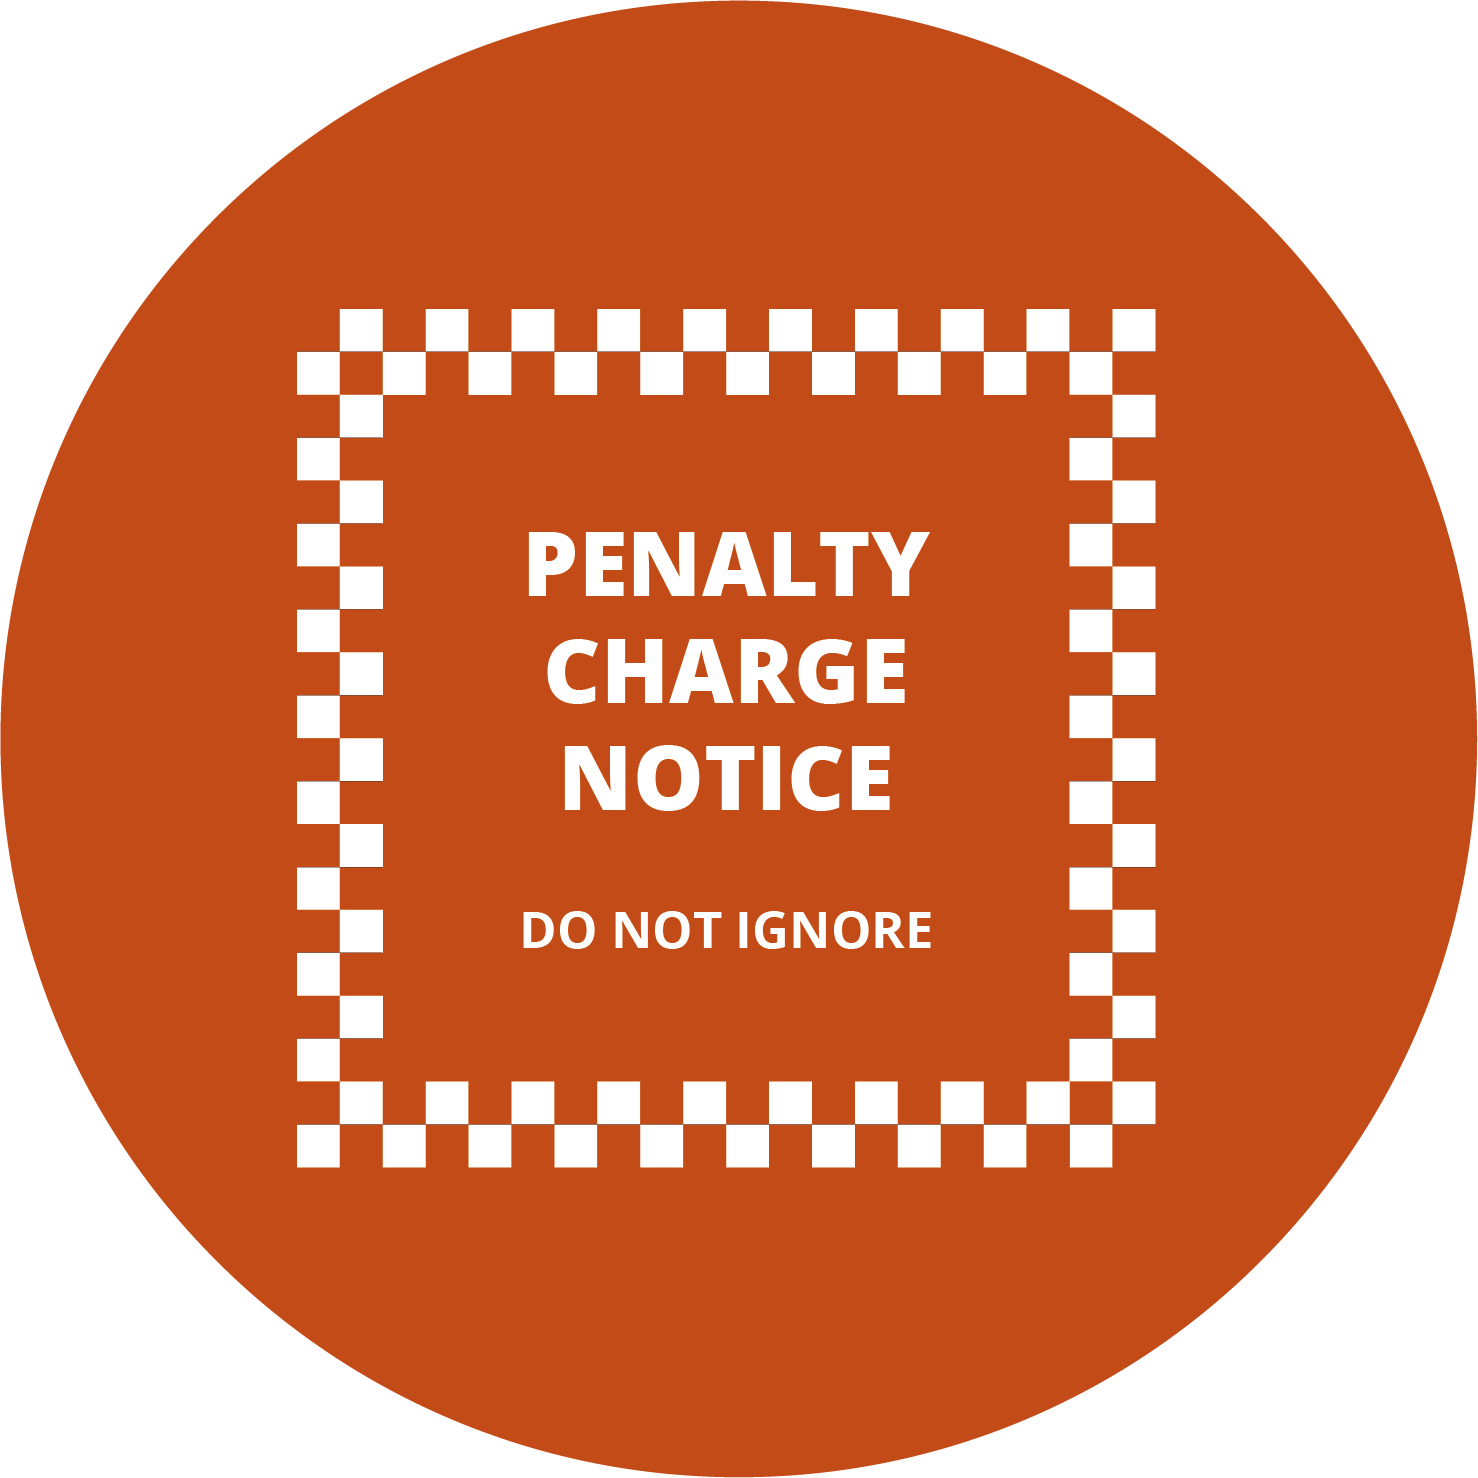 Large Button showing Penalty Charge Notice graphic